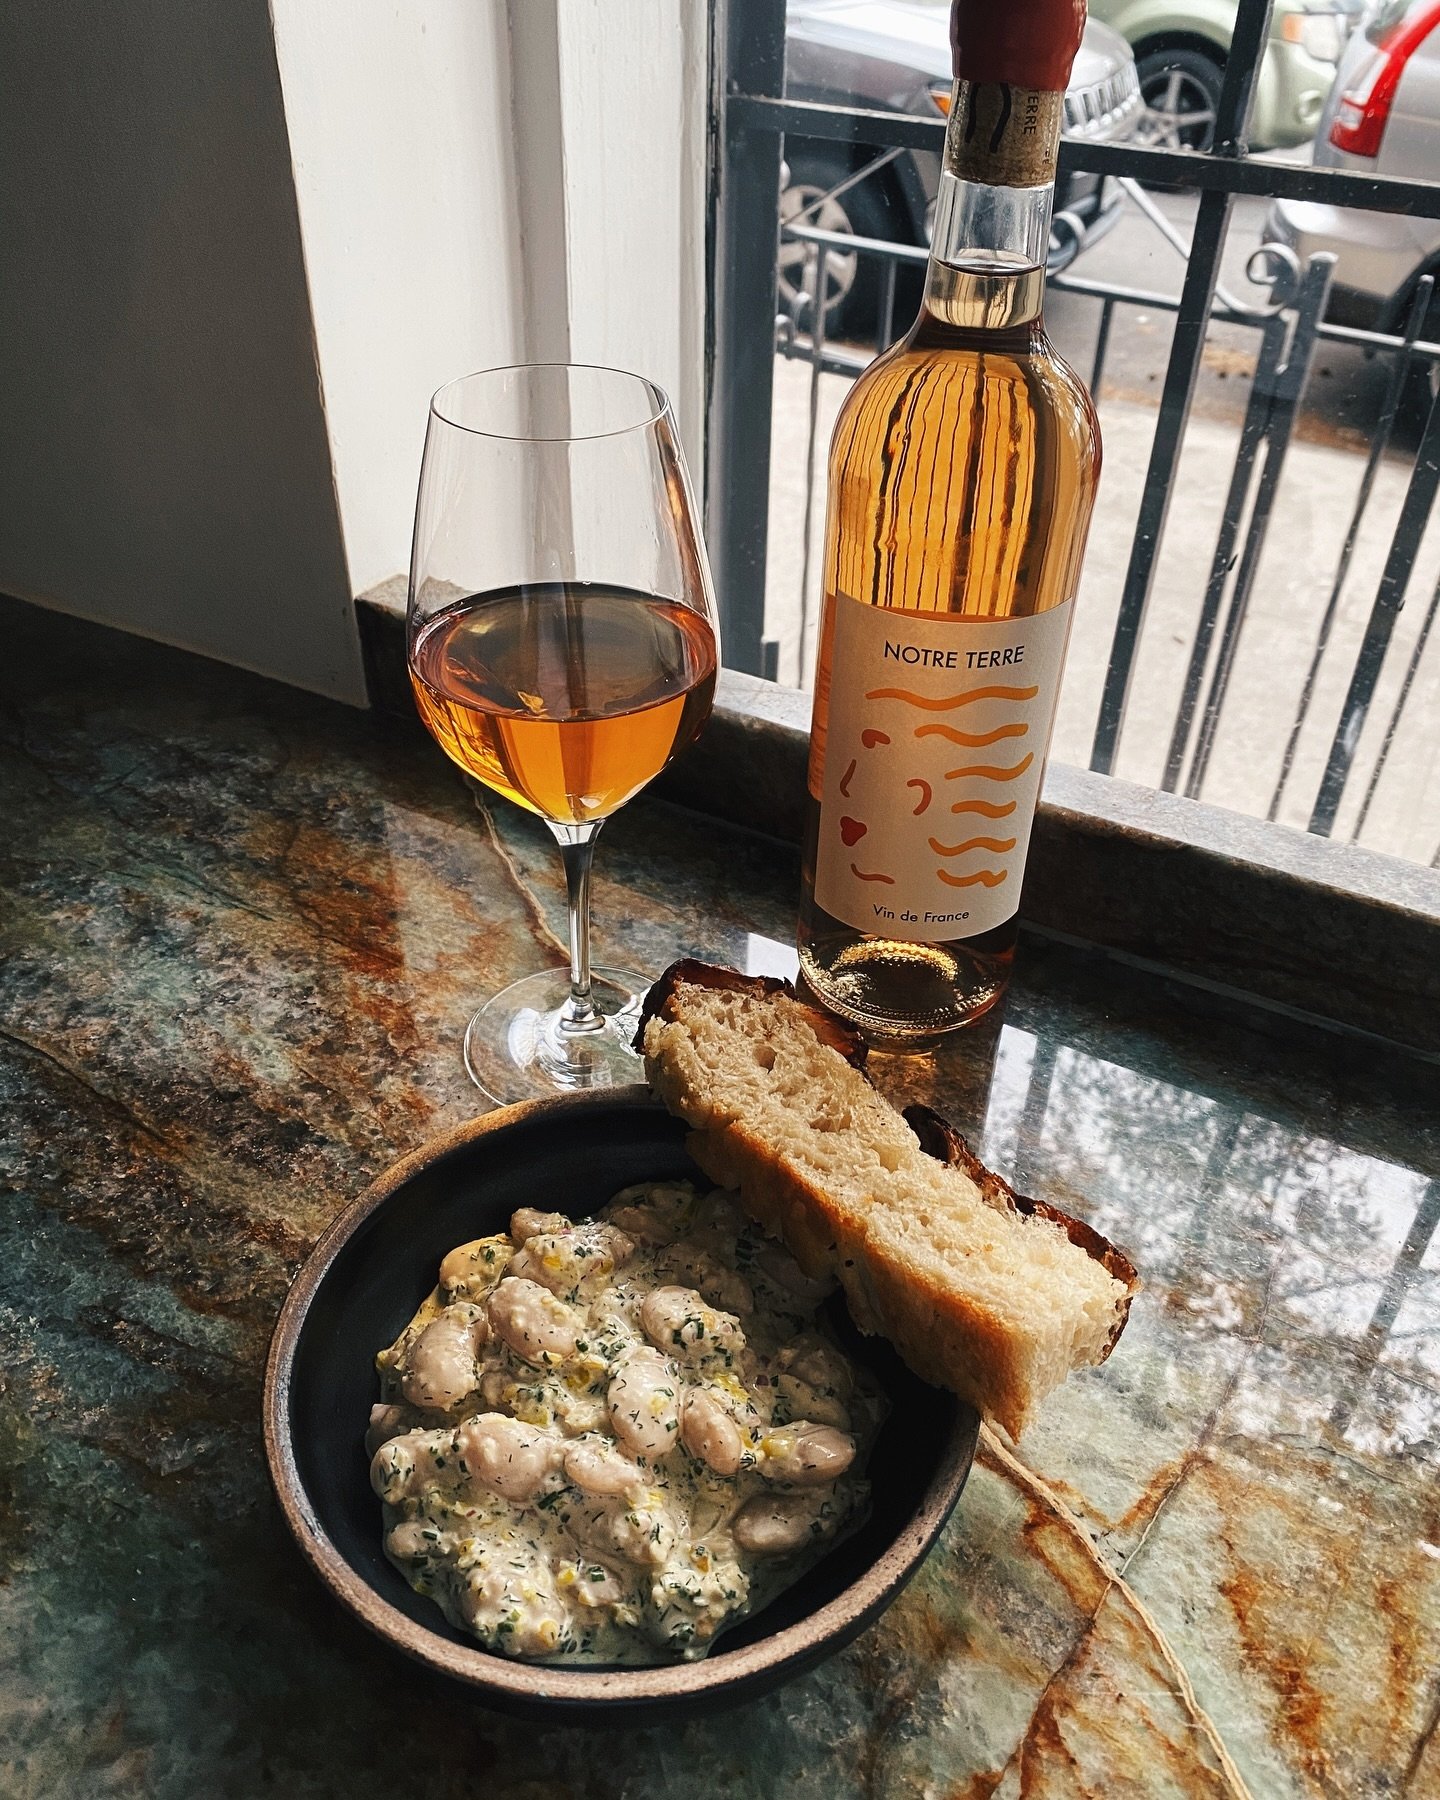 With sunny spring days comes new menu items! 

New food alert, GIGANTE BEAN SALAD. Chilled aioli base, pepperoncini, dill, shallots, house-made focaccia. 

New wine alert, NOTRE TERRE. This crisp, light orange is breezy with mineral acidity, tart man